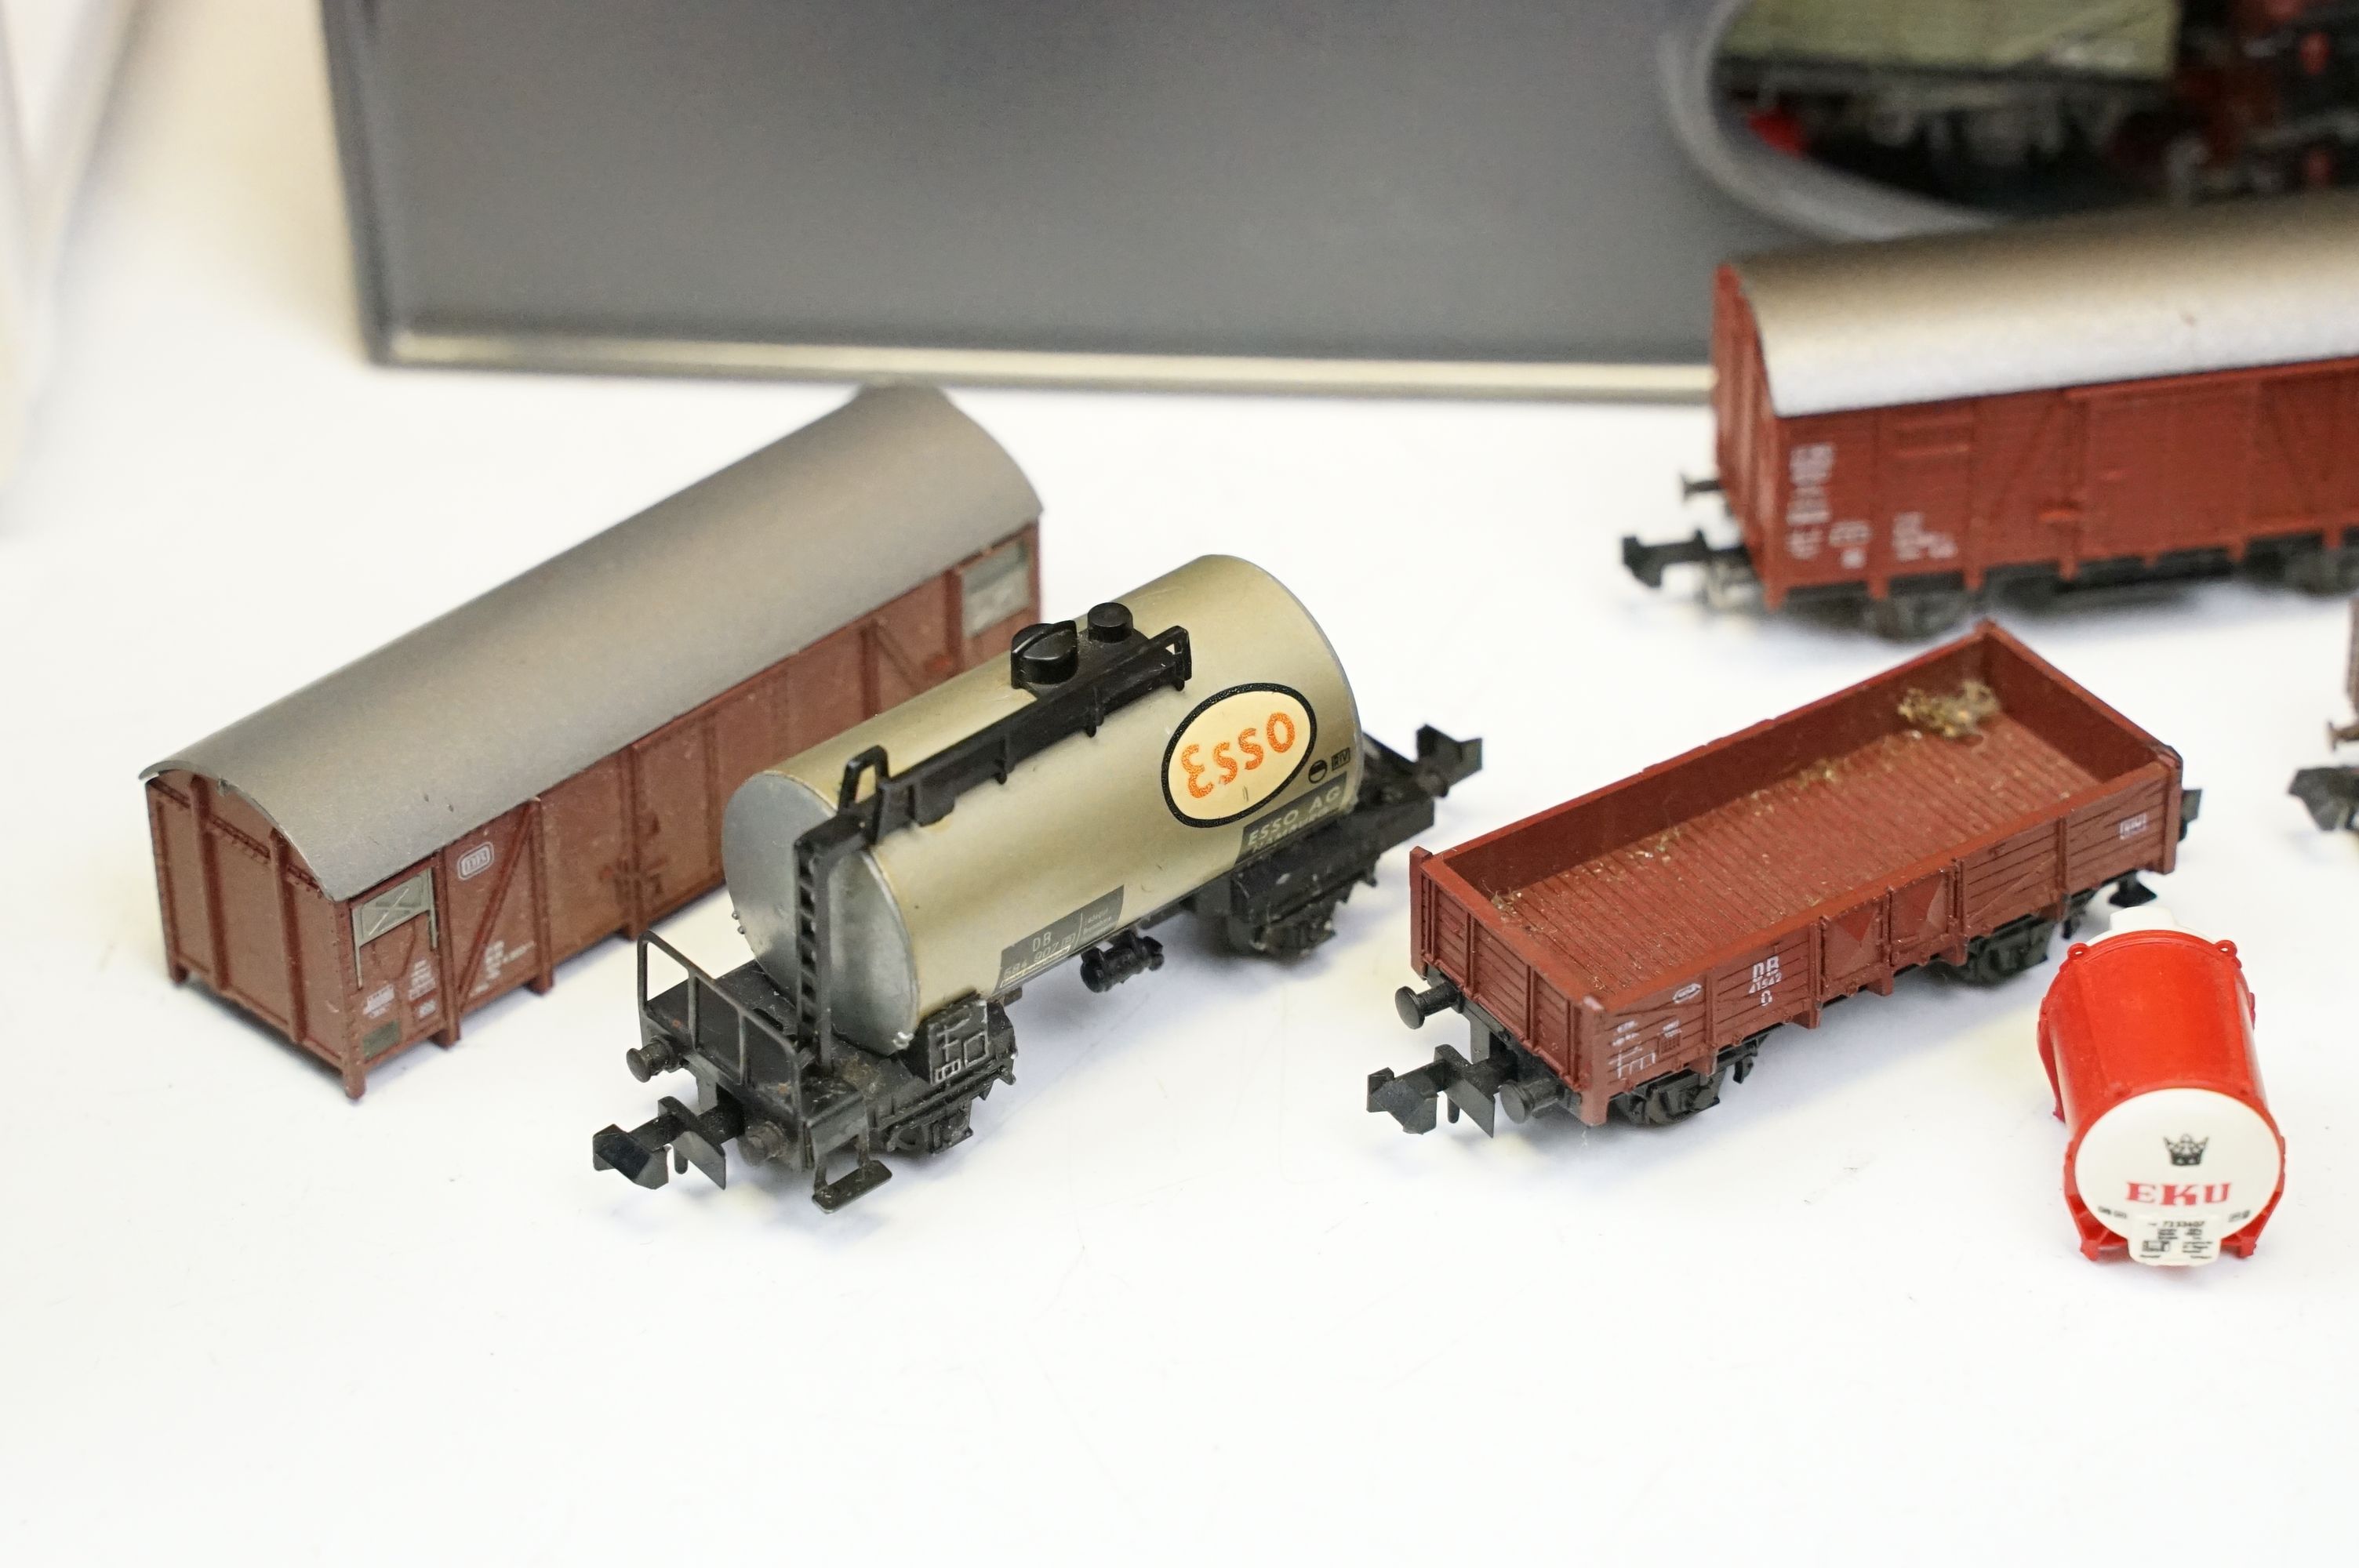 Over 80 N gauge items of rolling stock to include coaches, vans and wagons featuring Minitrix, Roco, - Image 2 of 8